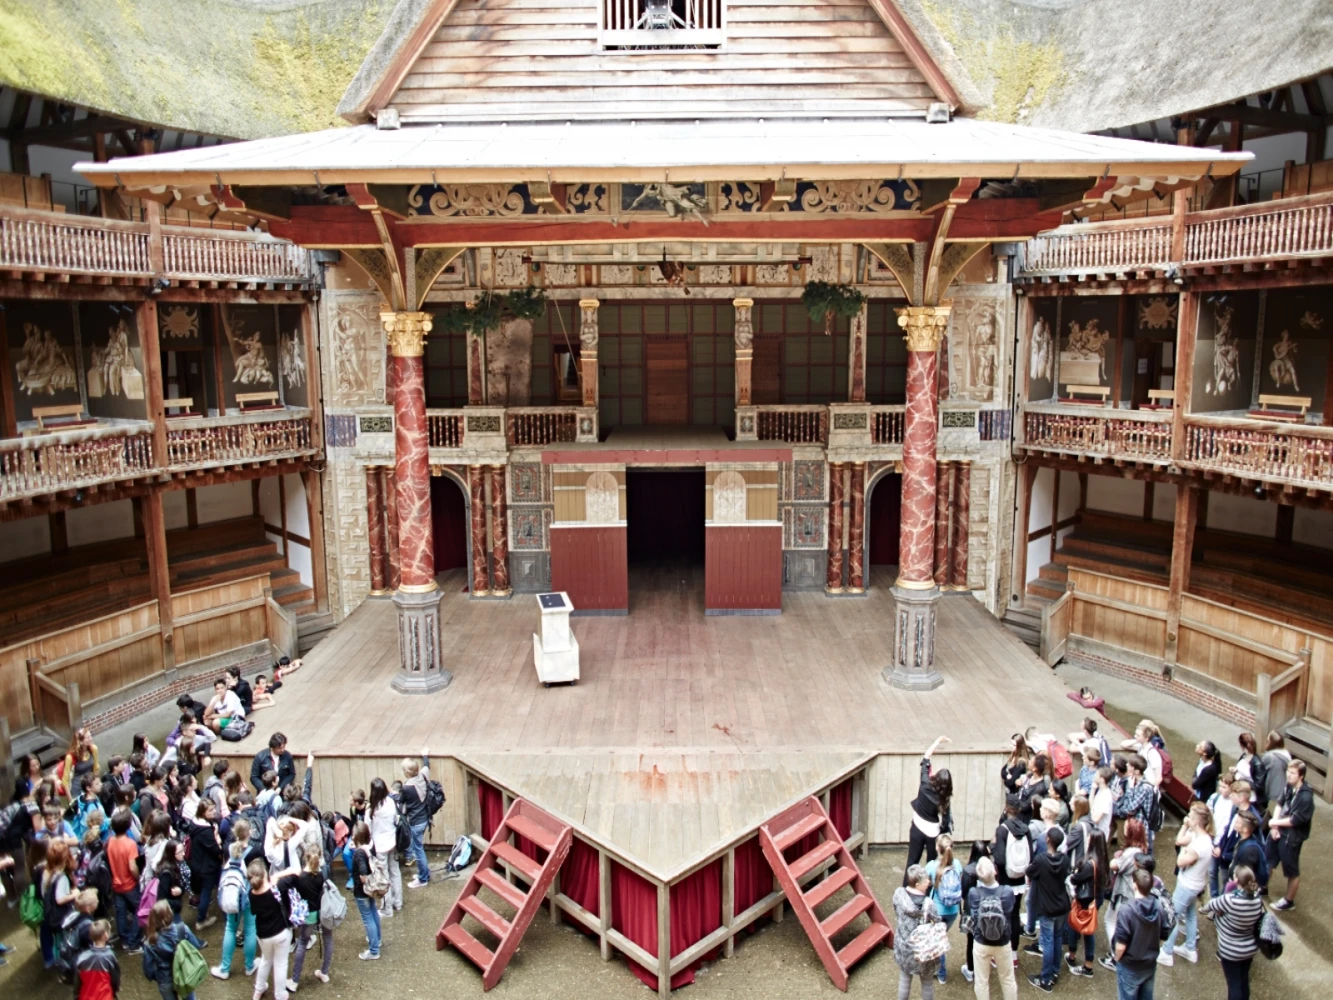 Shakespeare’s Globe Guided Tour: What to expect - 3